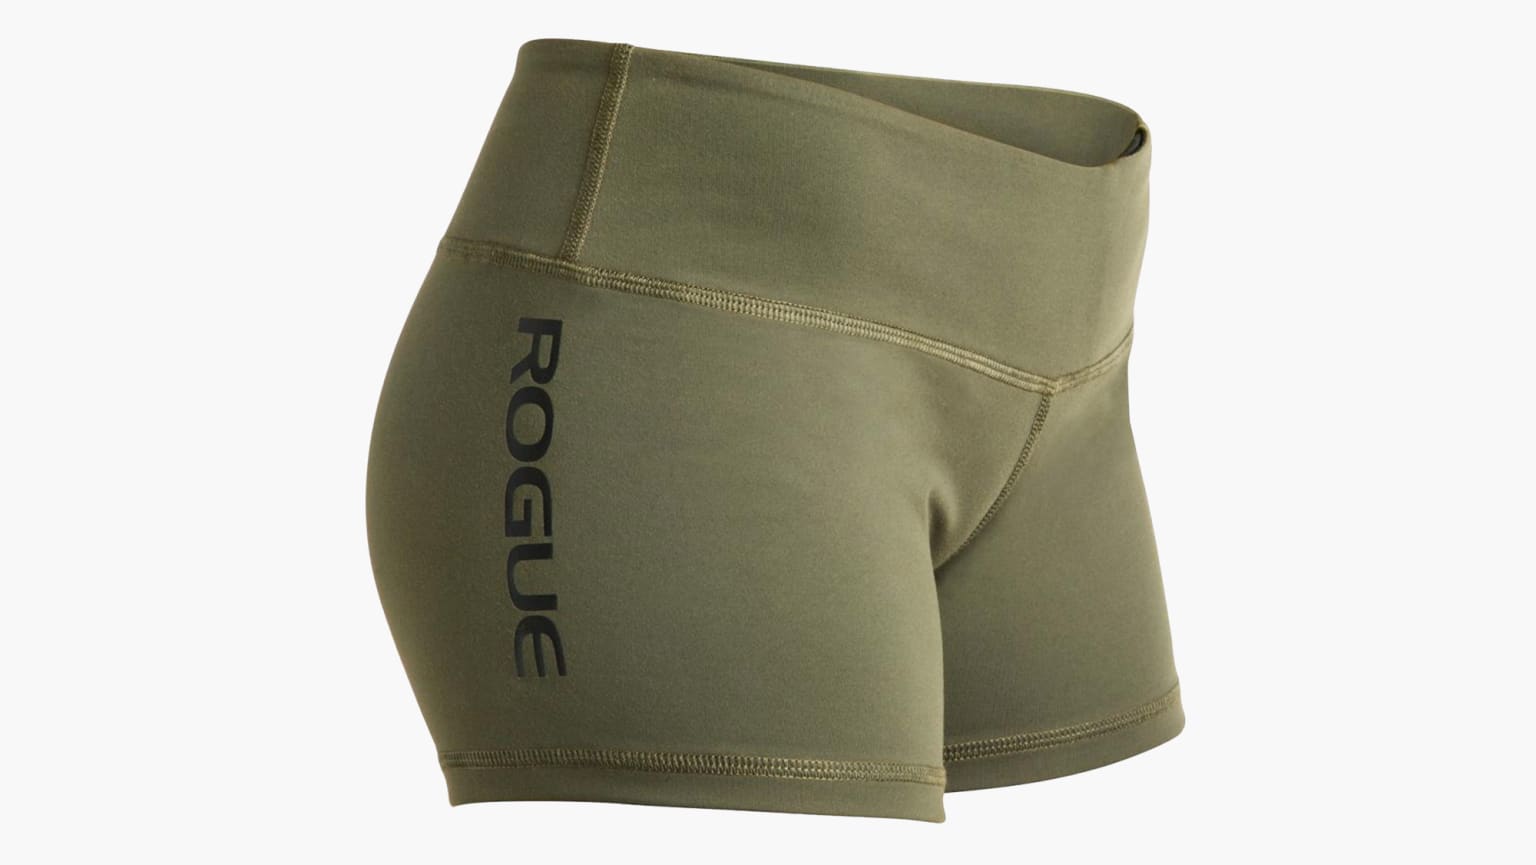 WOD Gear Clothing Wide Band Booty Shorts